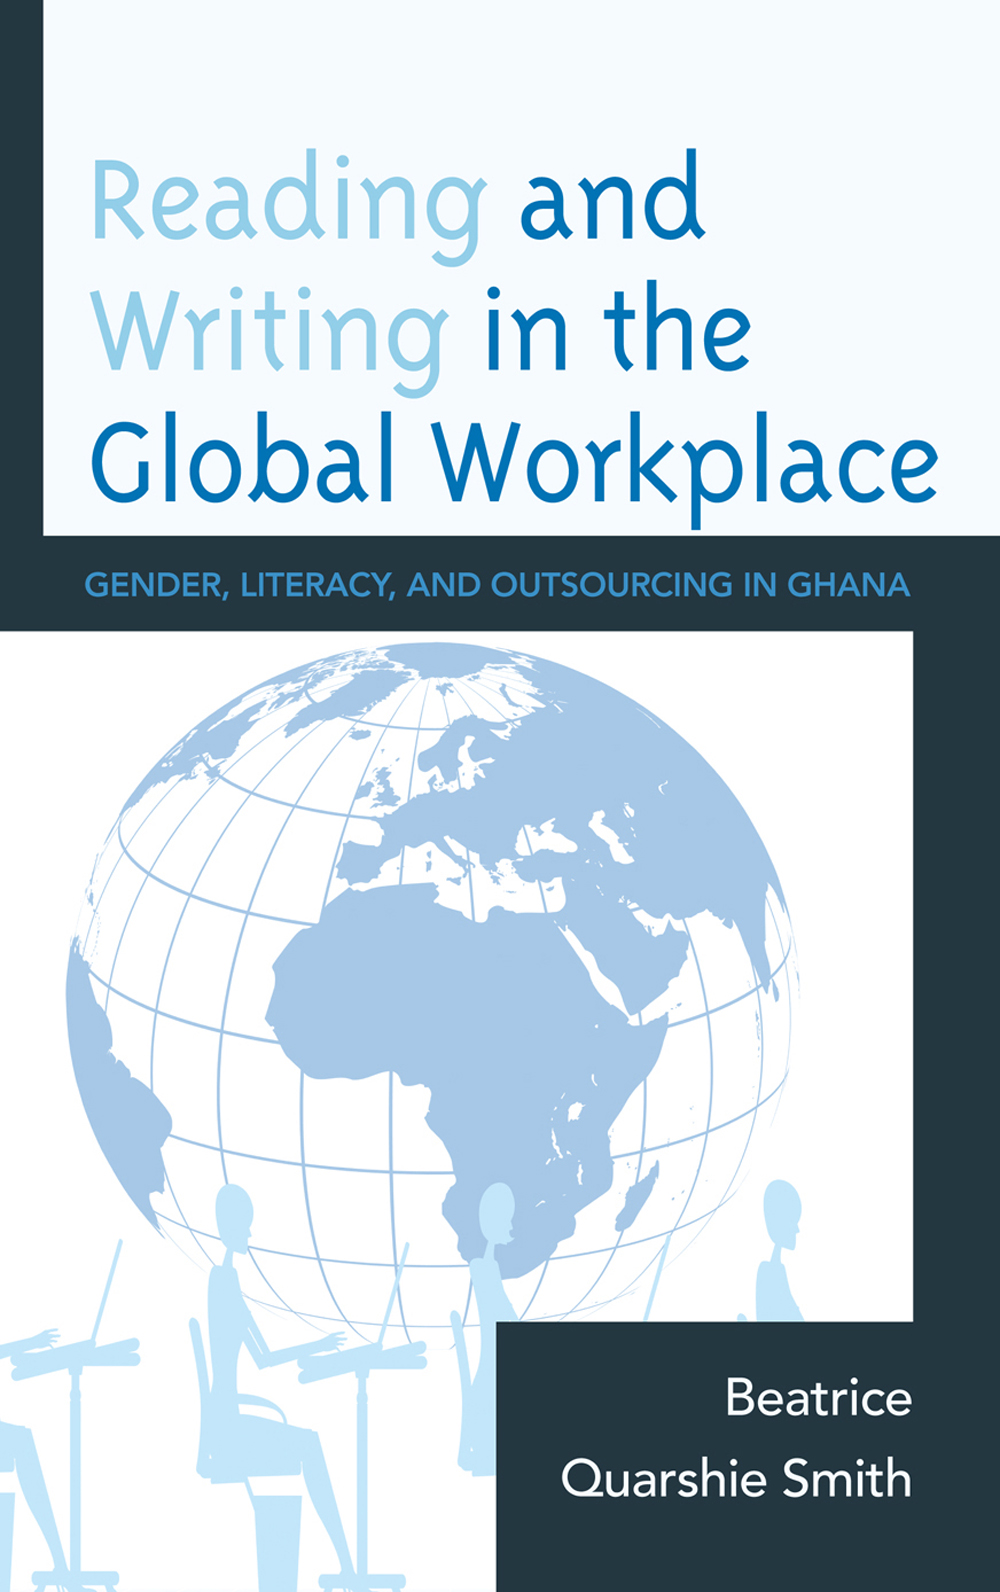 Reading and Writing in the Global Workplace: Gender, Literacy, and Outsourcing in Ghana